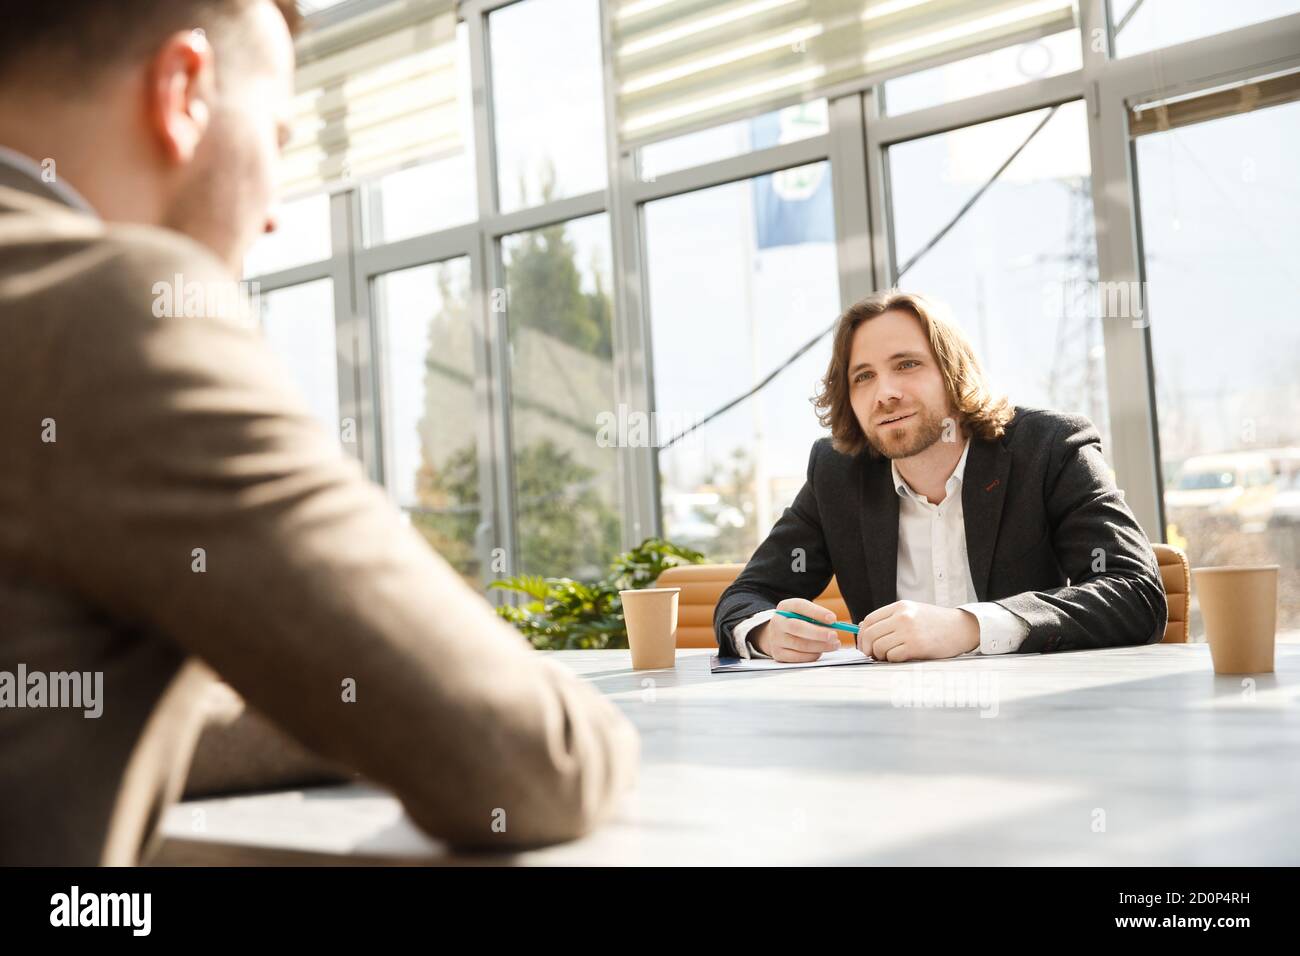 Interviewer is questioning a candidate on a job interview. Stock Photo